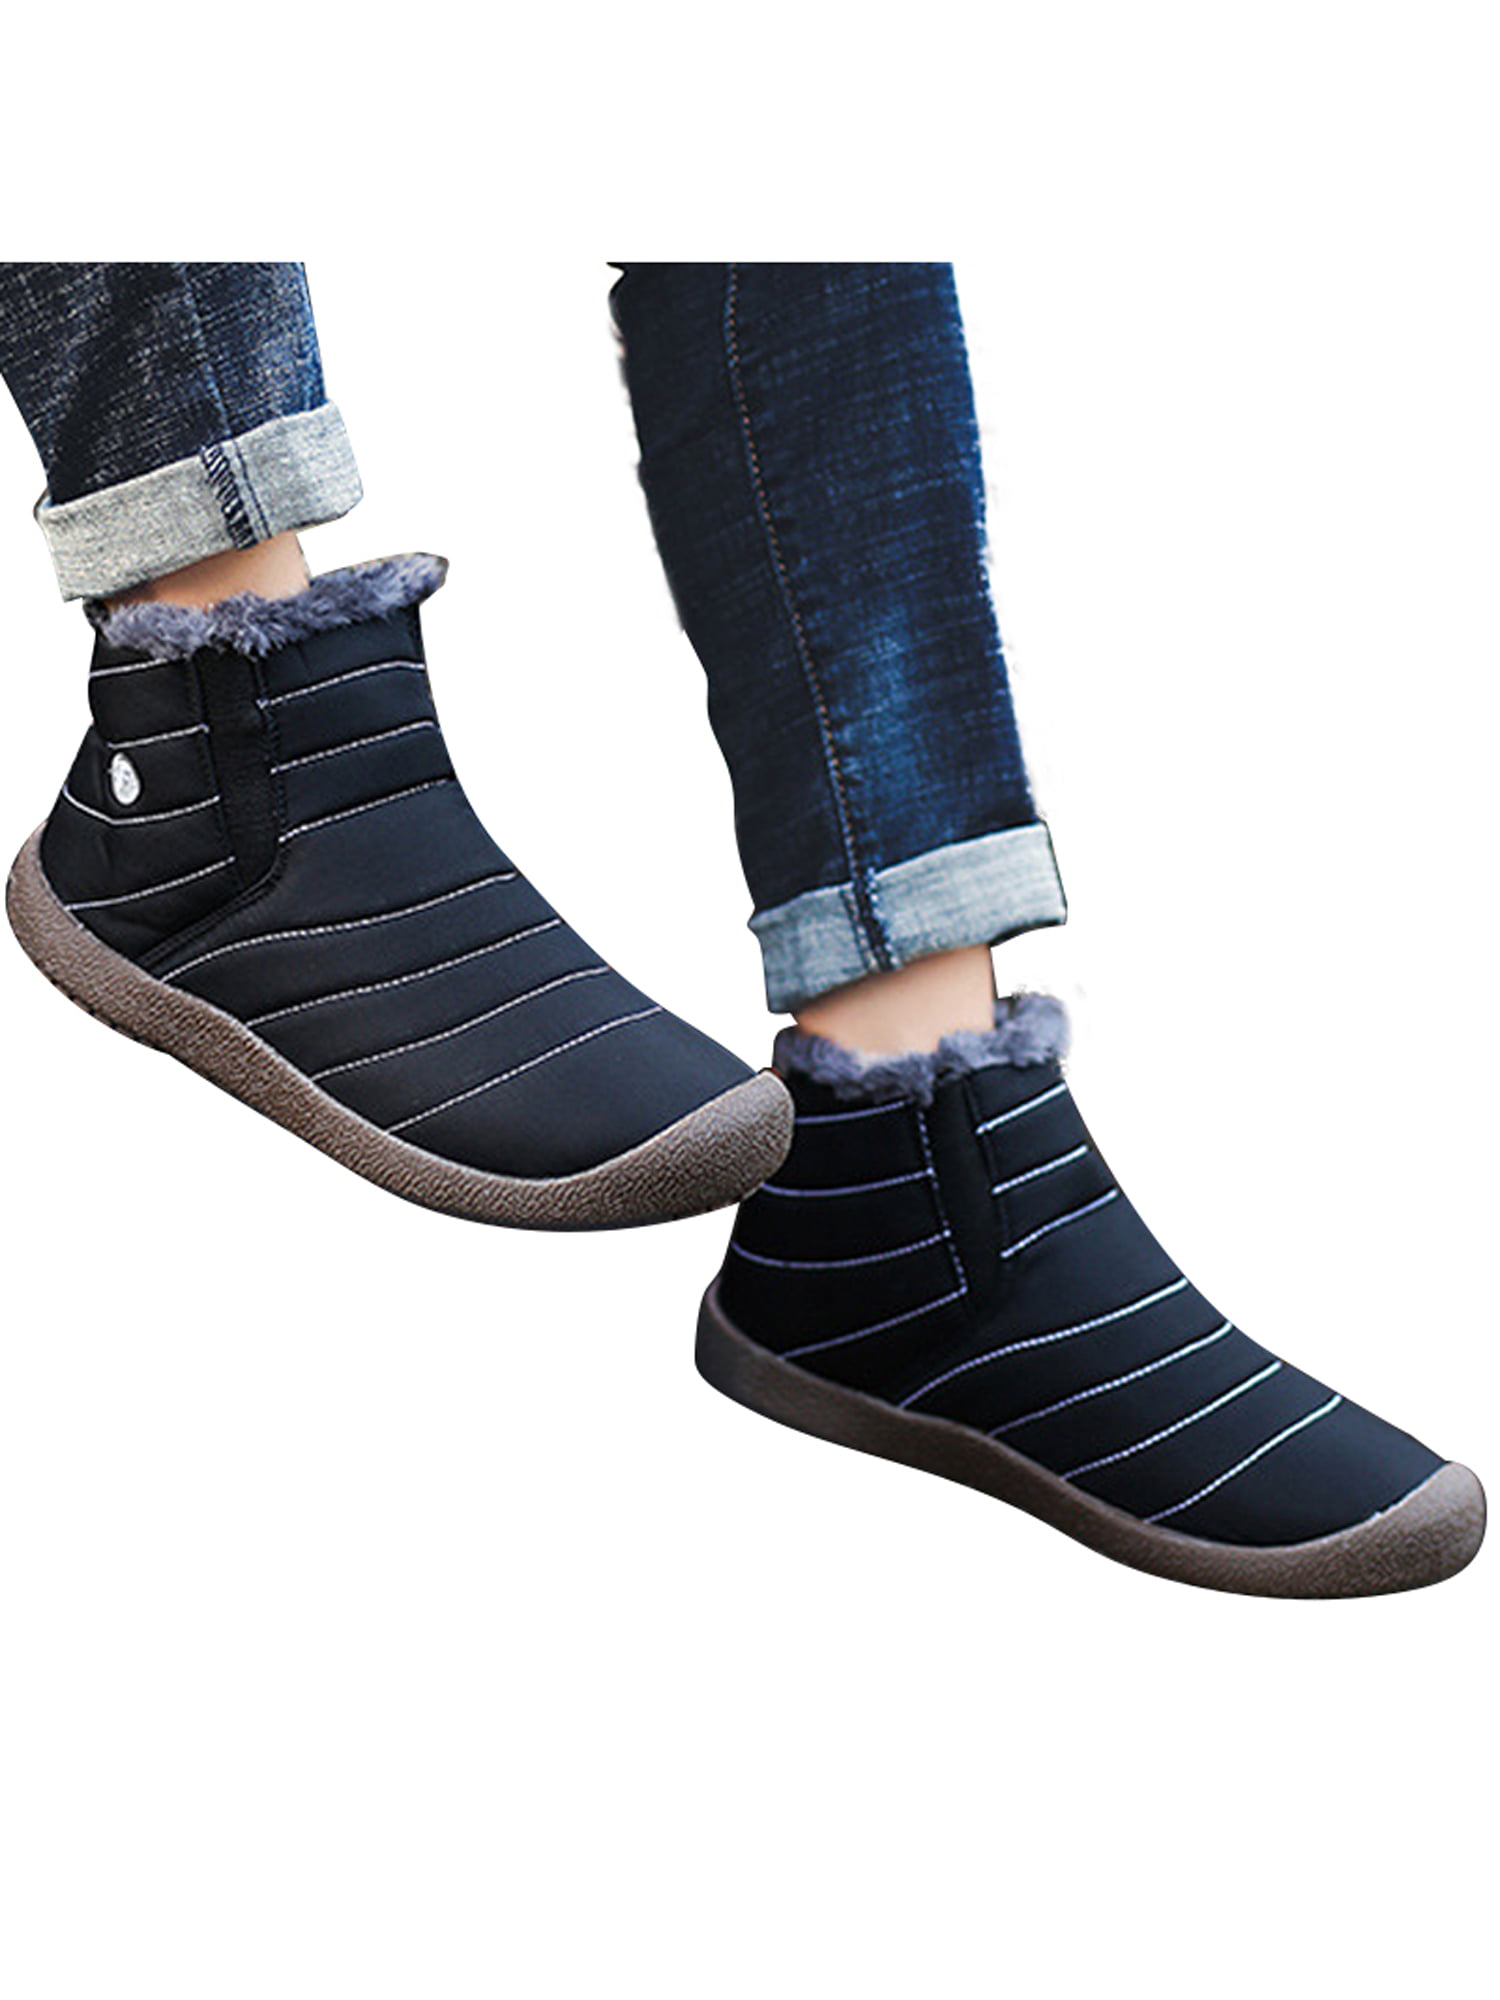 Wodstyle - Men's Fur Lined Snow Boots Winter Warm Ankle Slip On Booties ...